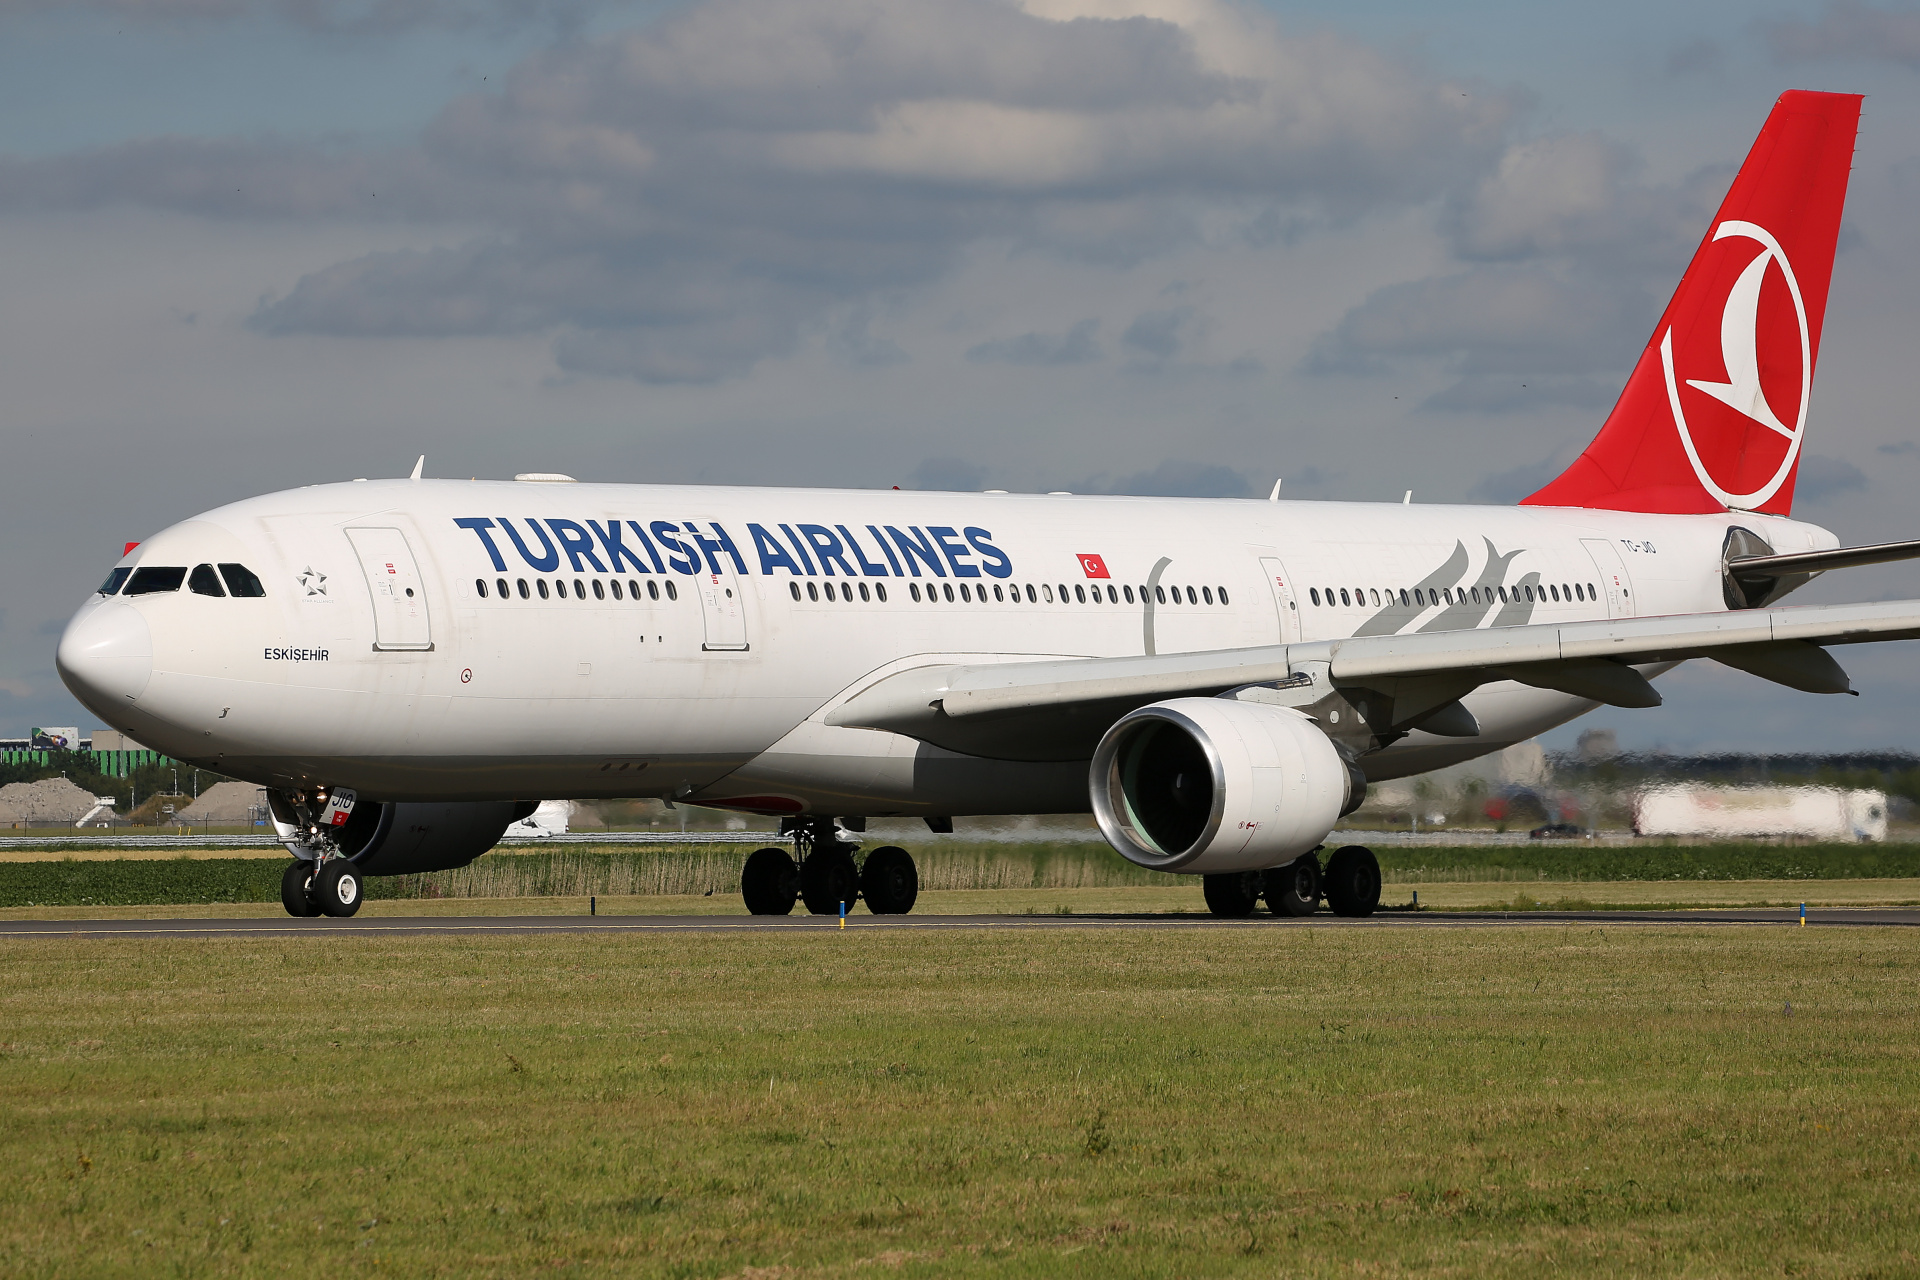 TC-JIO (Aircraft » Schiphol Spotting » Airbus A330-200 » THY Turkish Airlines)